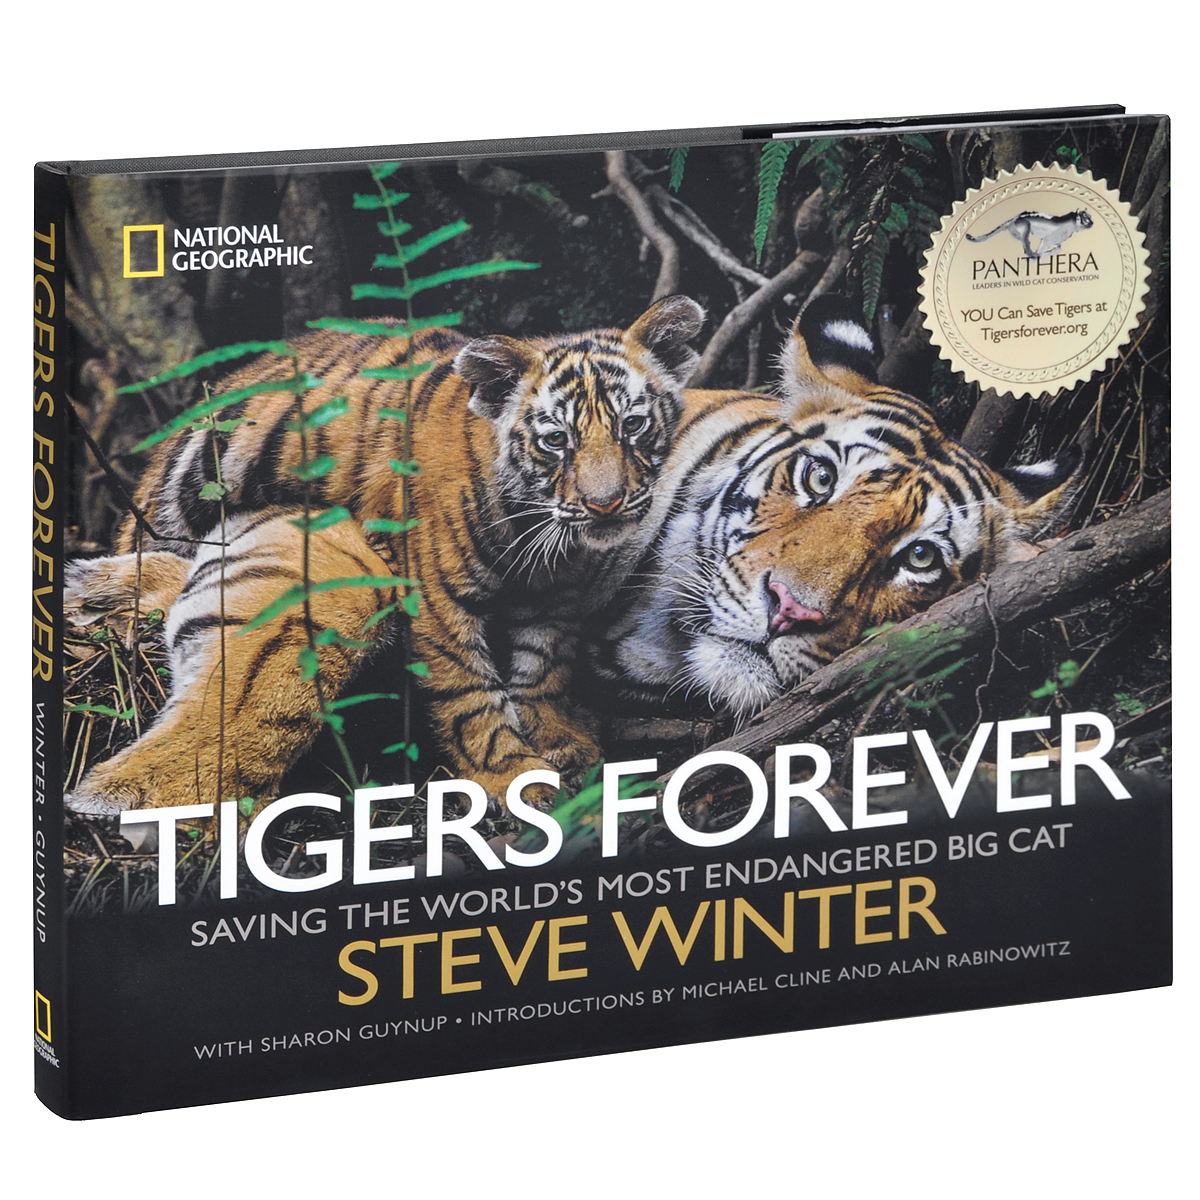 Tigers Forever: Saving the World's Most Endangered Big Cat